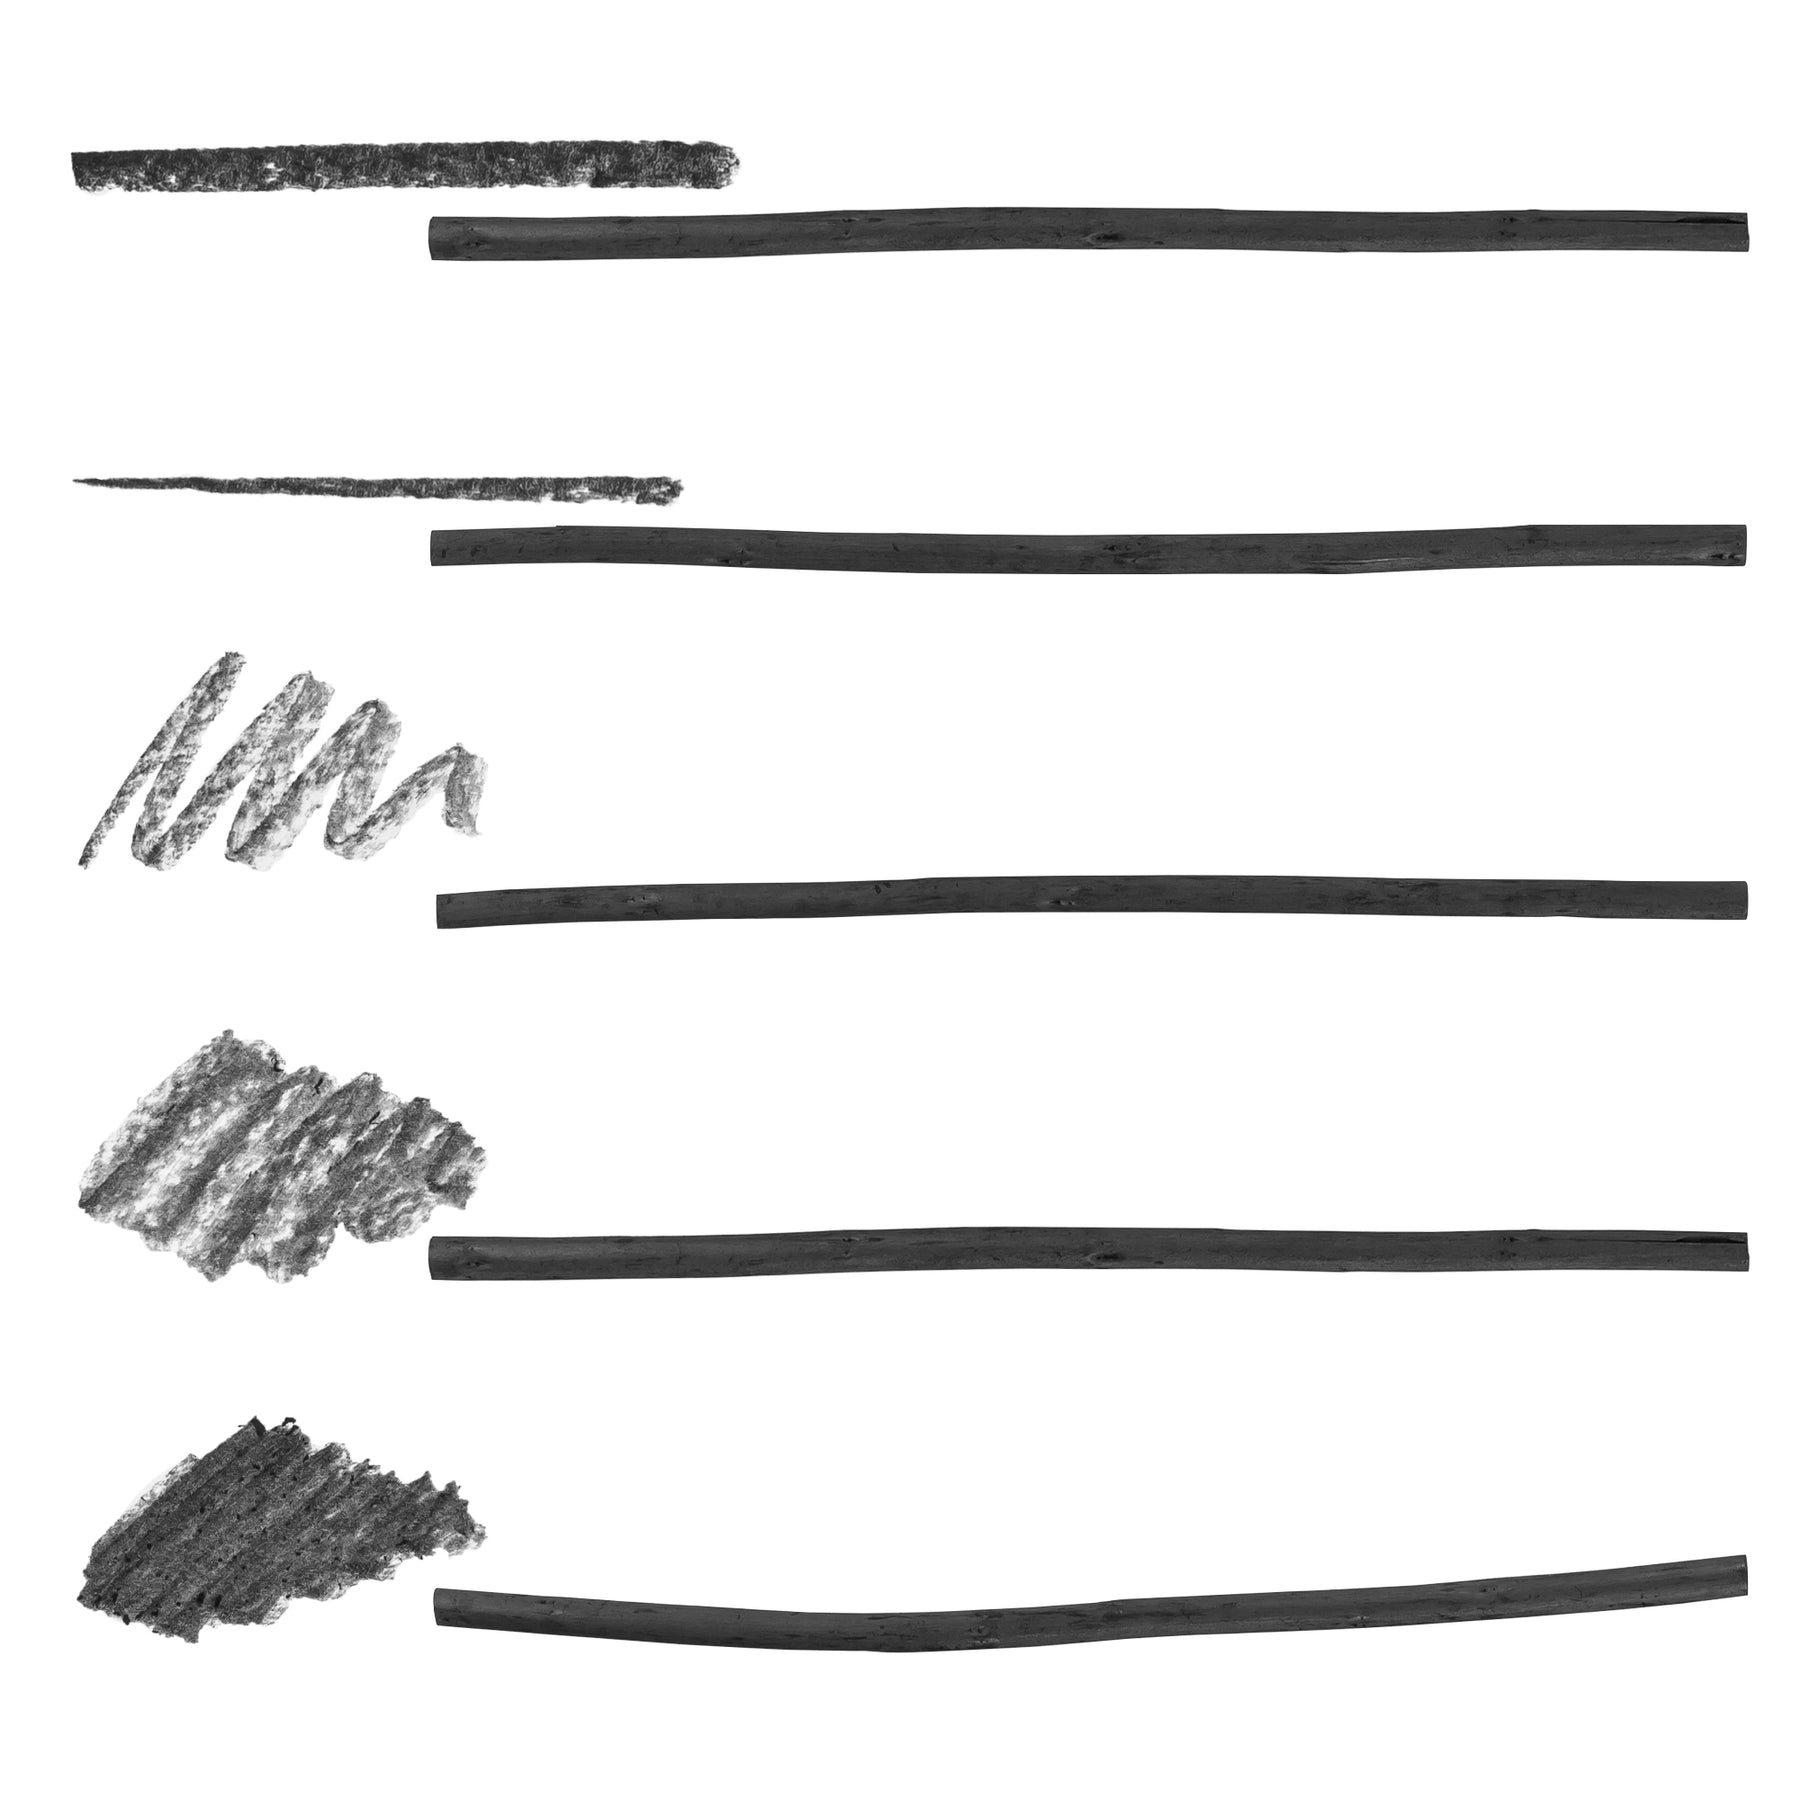 Pacific Arc - Artist Vine Charcoal, Soft, Black 4 Charcoal Sticks for Drawing, Sketching, and Fine Art